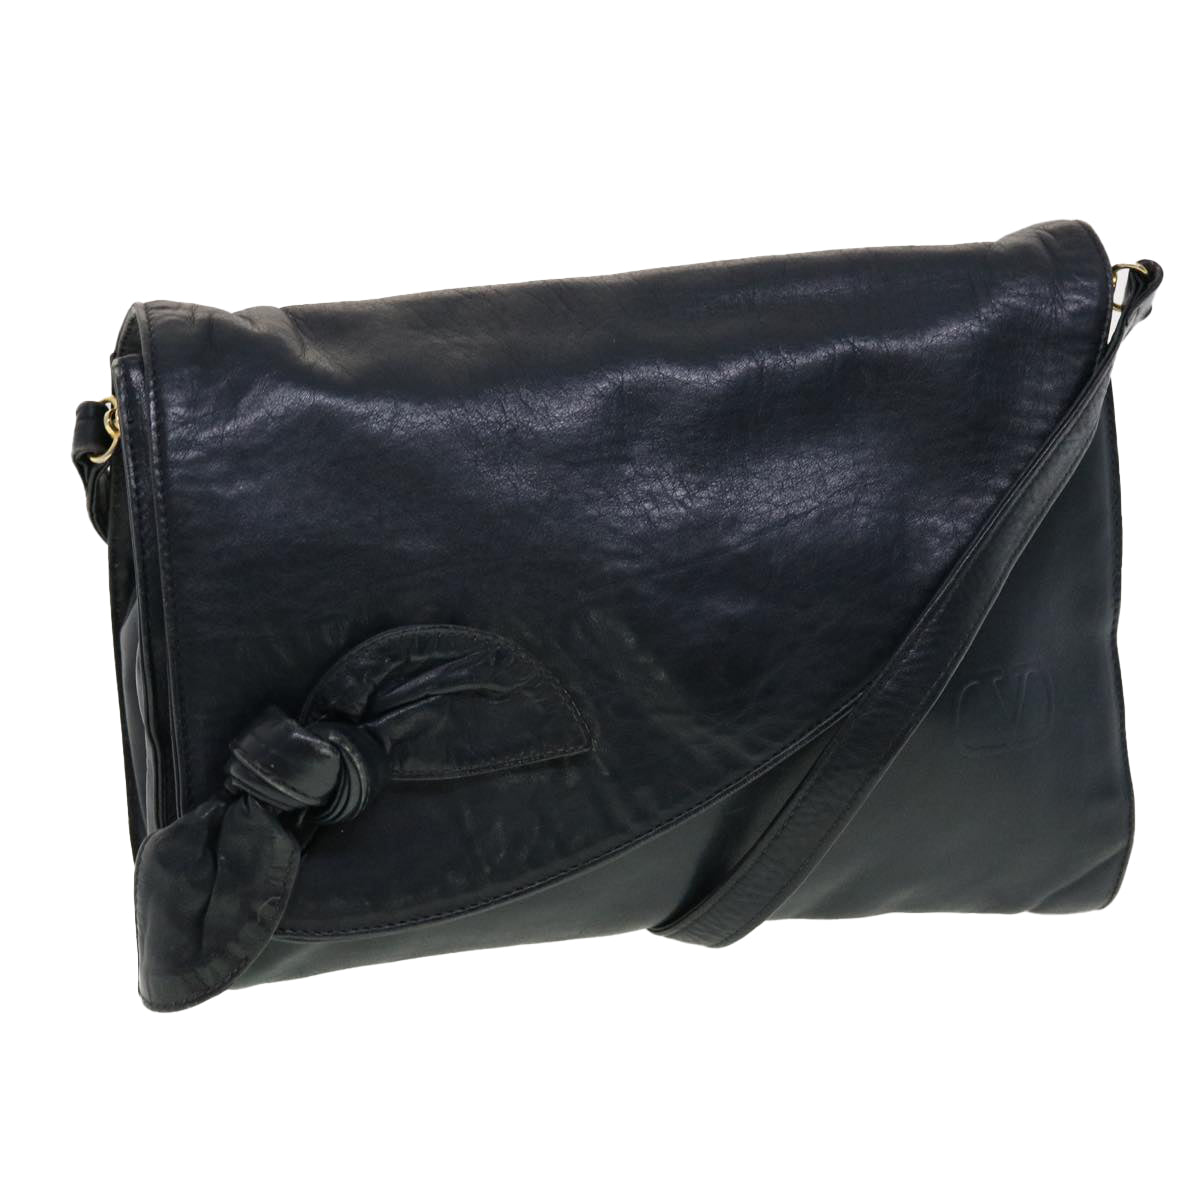 VALENTINO Shoulder Bag Leather Navy Auth bs5210